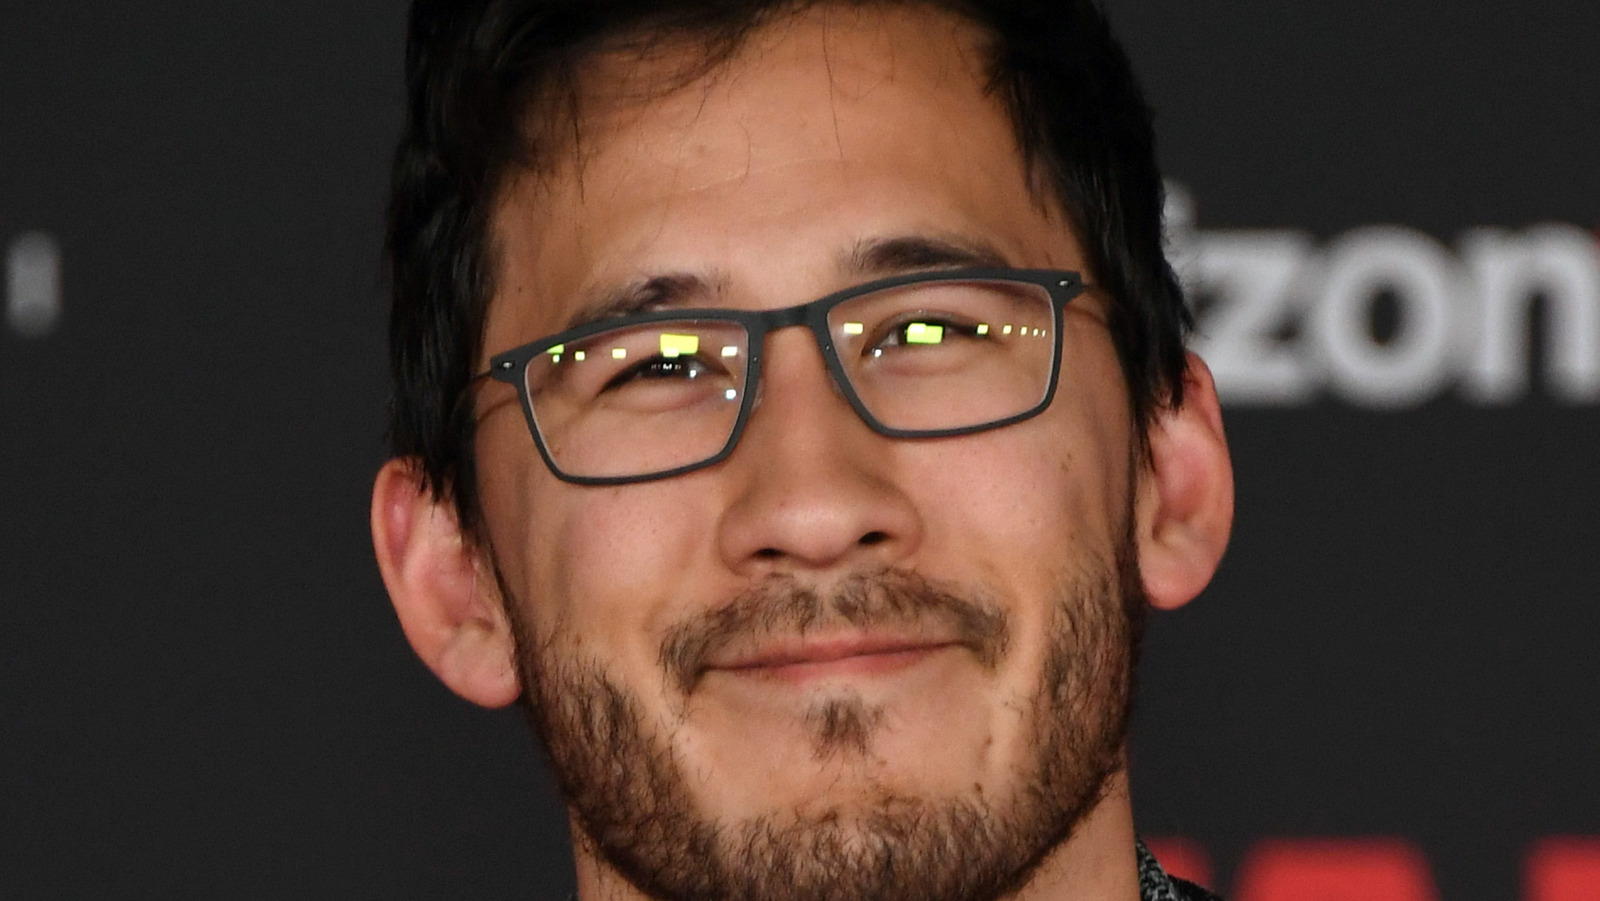 Streamers Confirm What We All Suspected About Markiplier